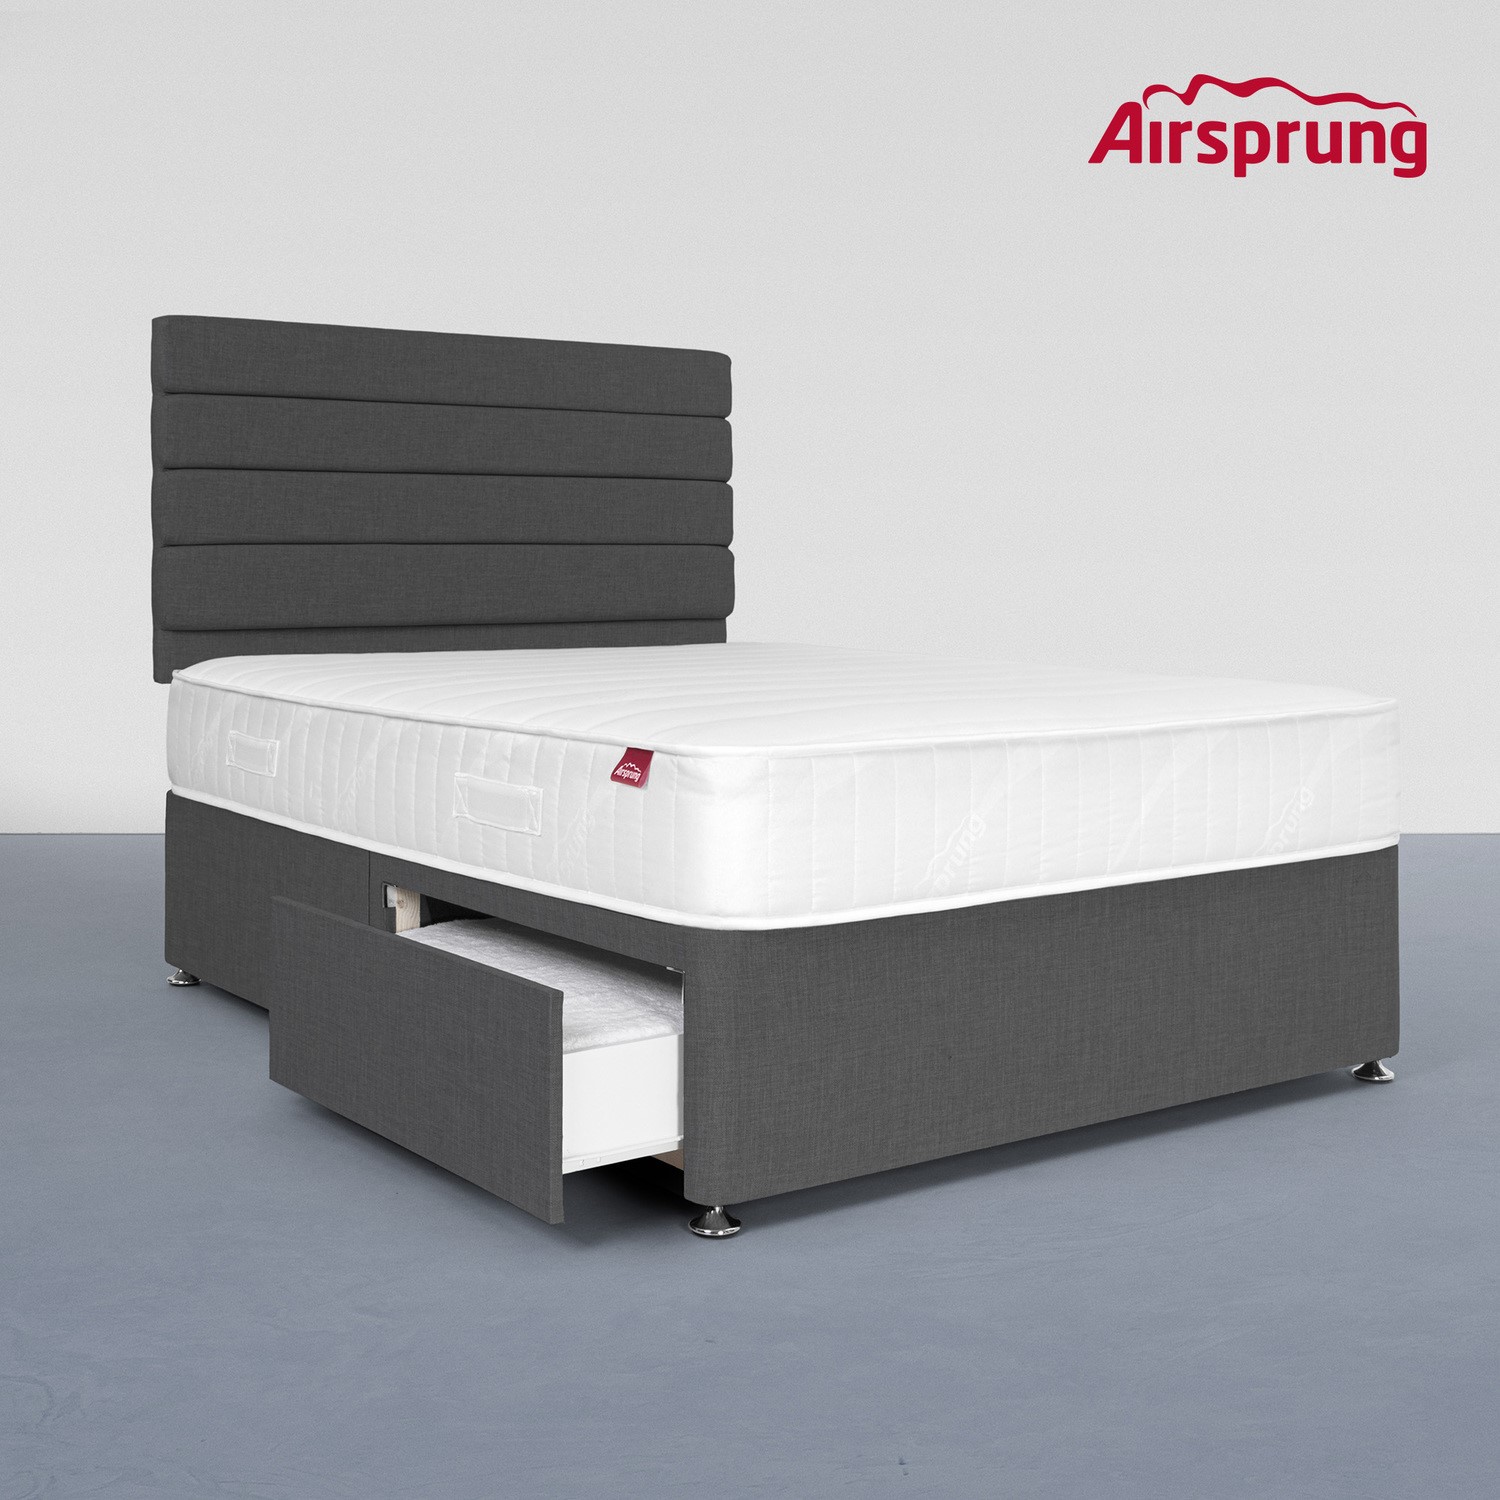 Read more about Airsprung double 2 drawer divan bed with comfort mattress charcoal